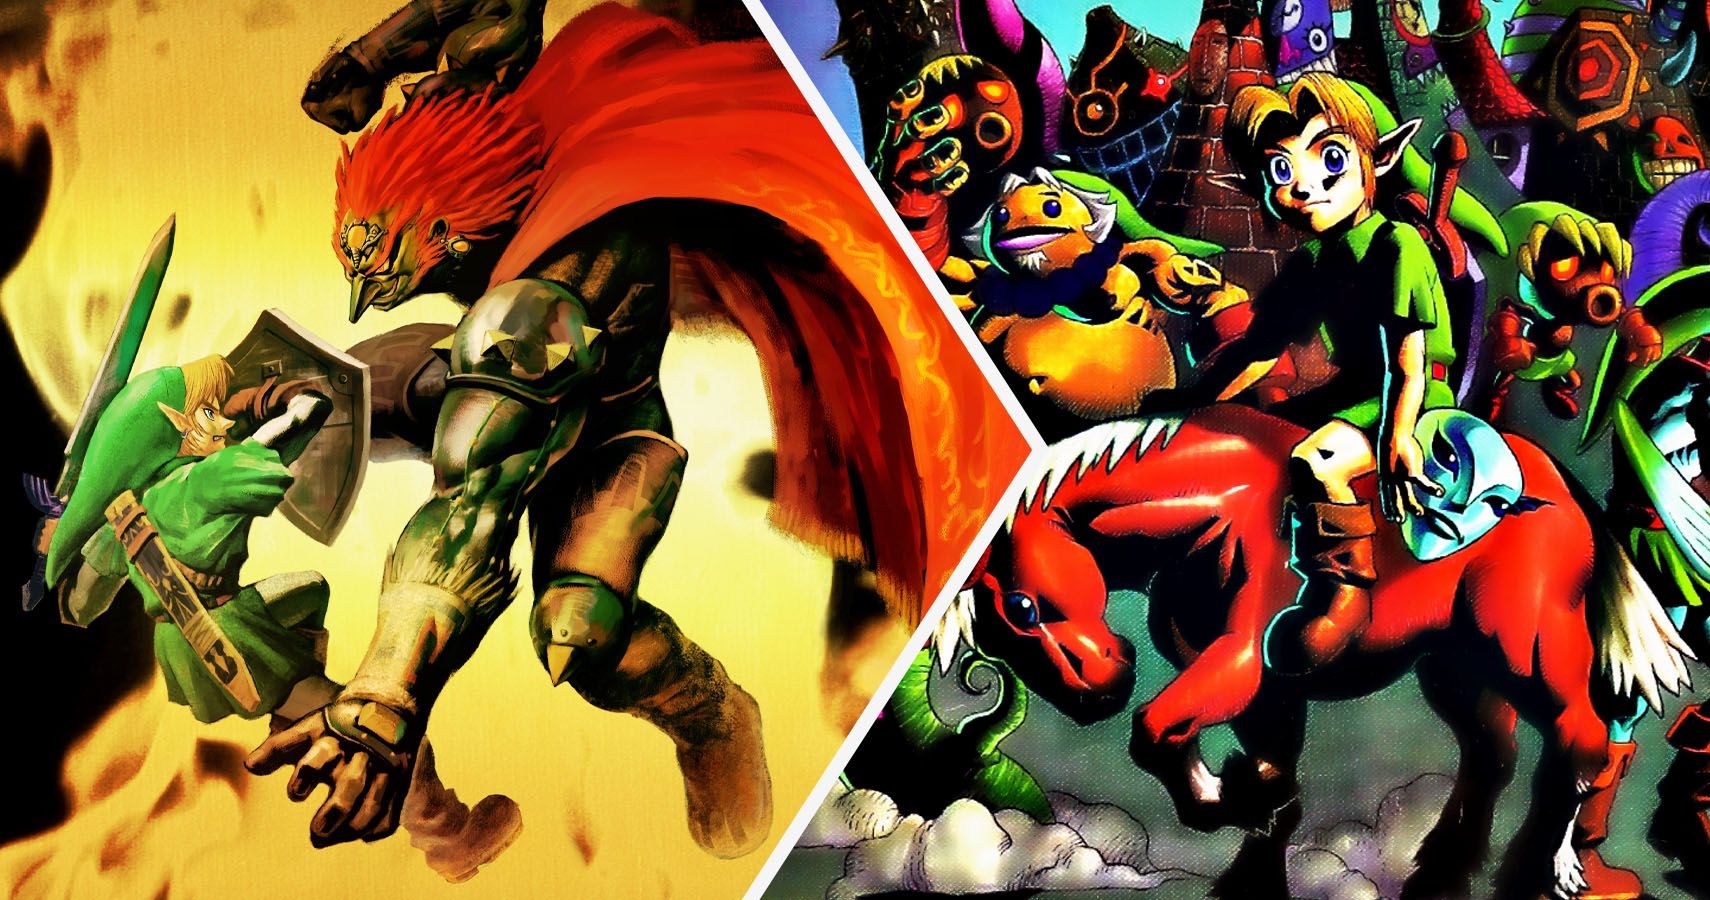 Zelda: Ocarina Of Time Vs Majora's Mask – Which Game Is Better?